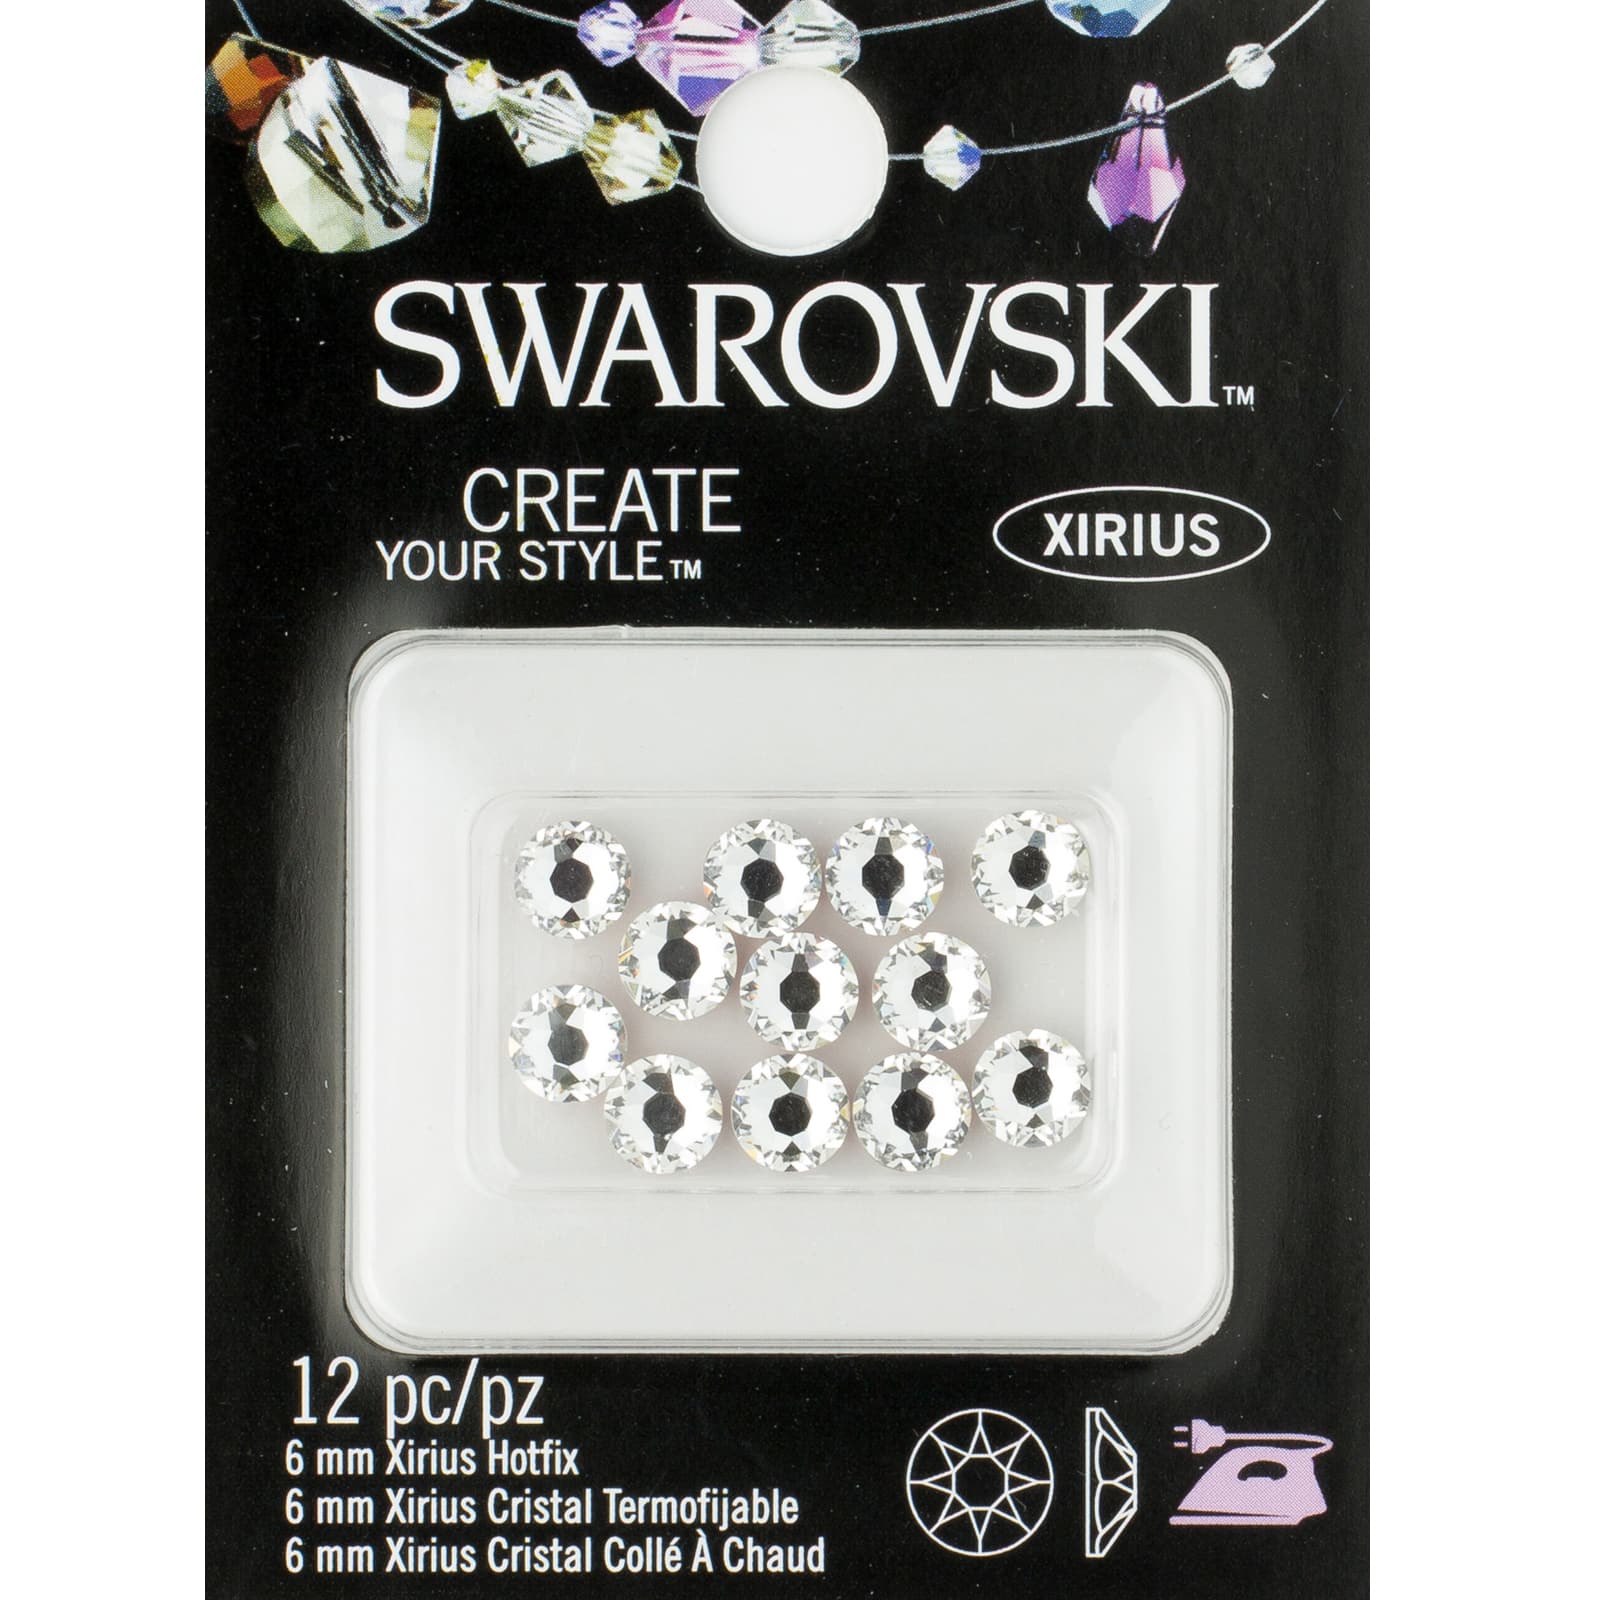 Swarovski™ Create Your Style™ Hotfix Crystals, Clear Crystal 6mm